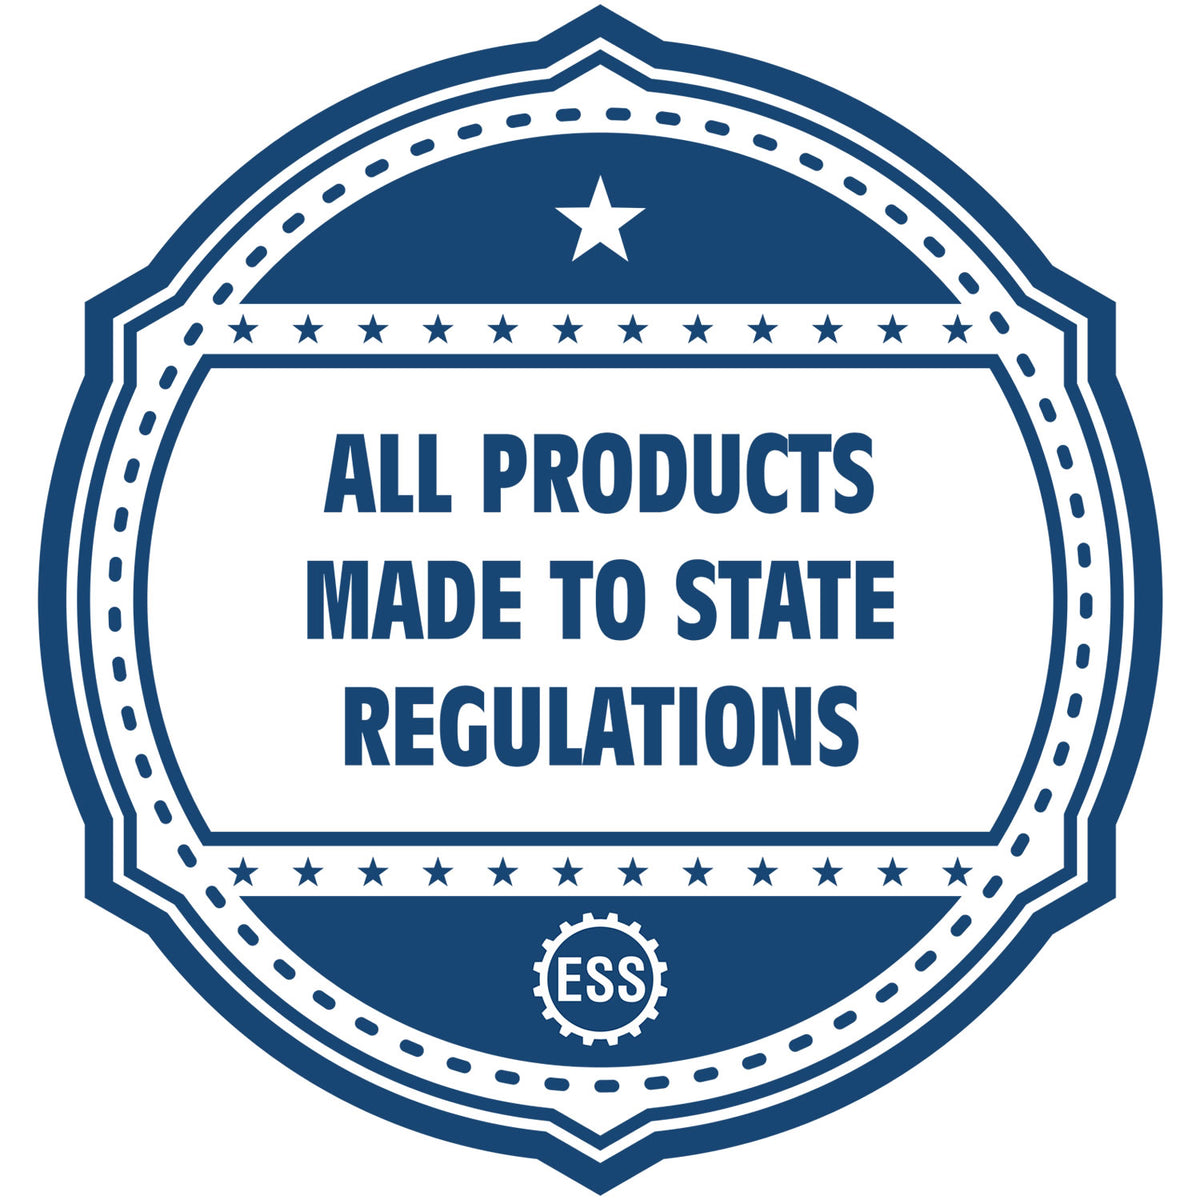 An icon or badge element for the South Dakota Engineer Desk Seal showing that this product is made in compliance with state regulations.